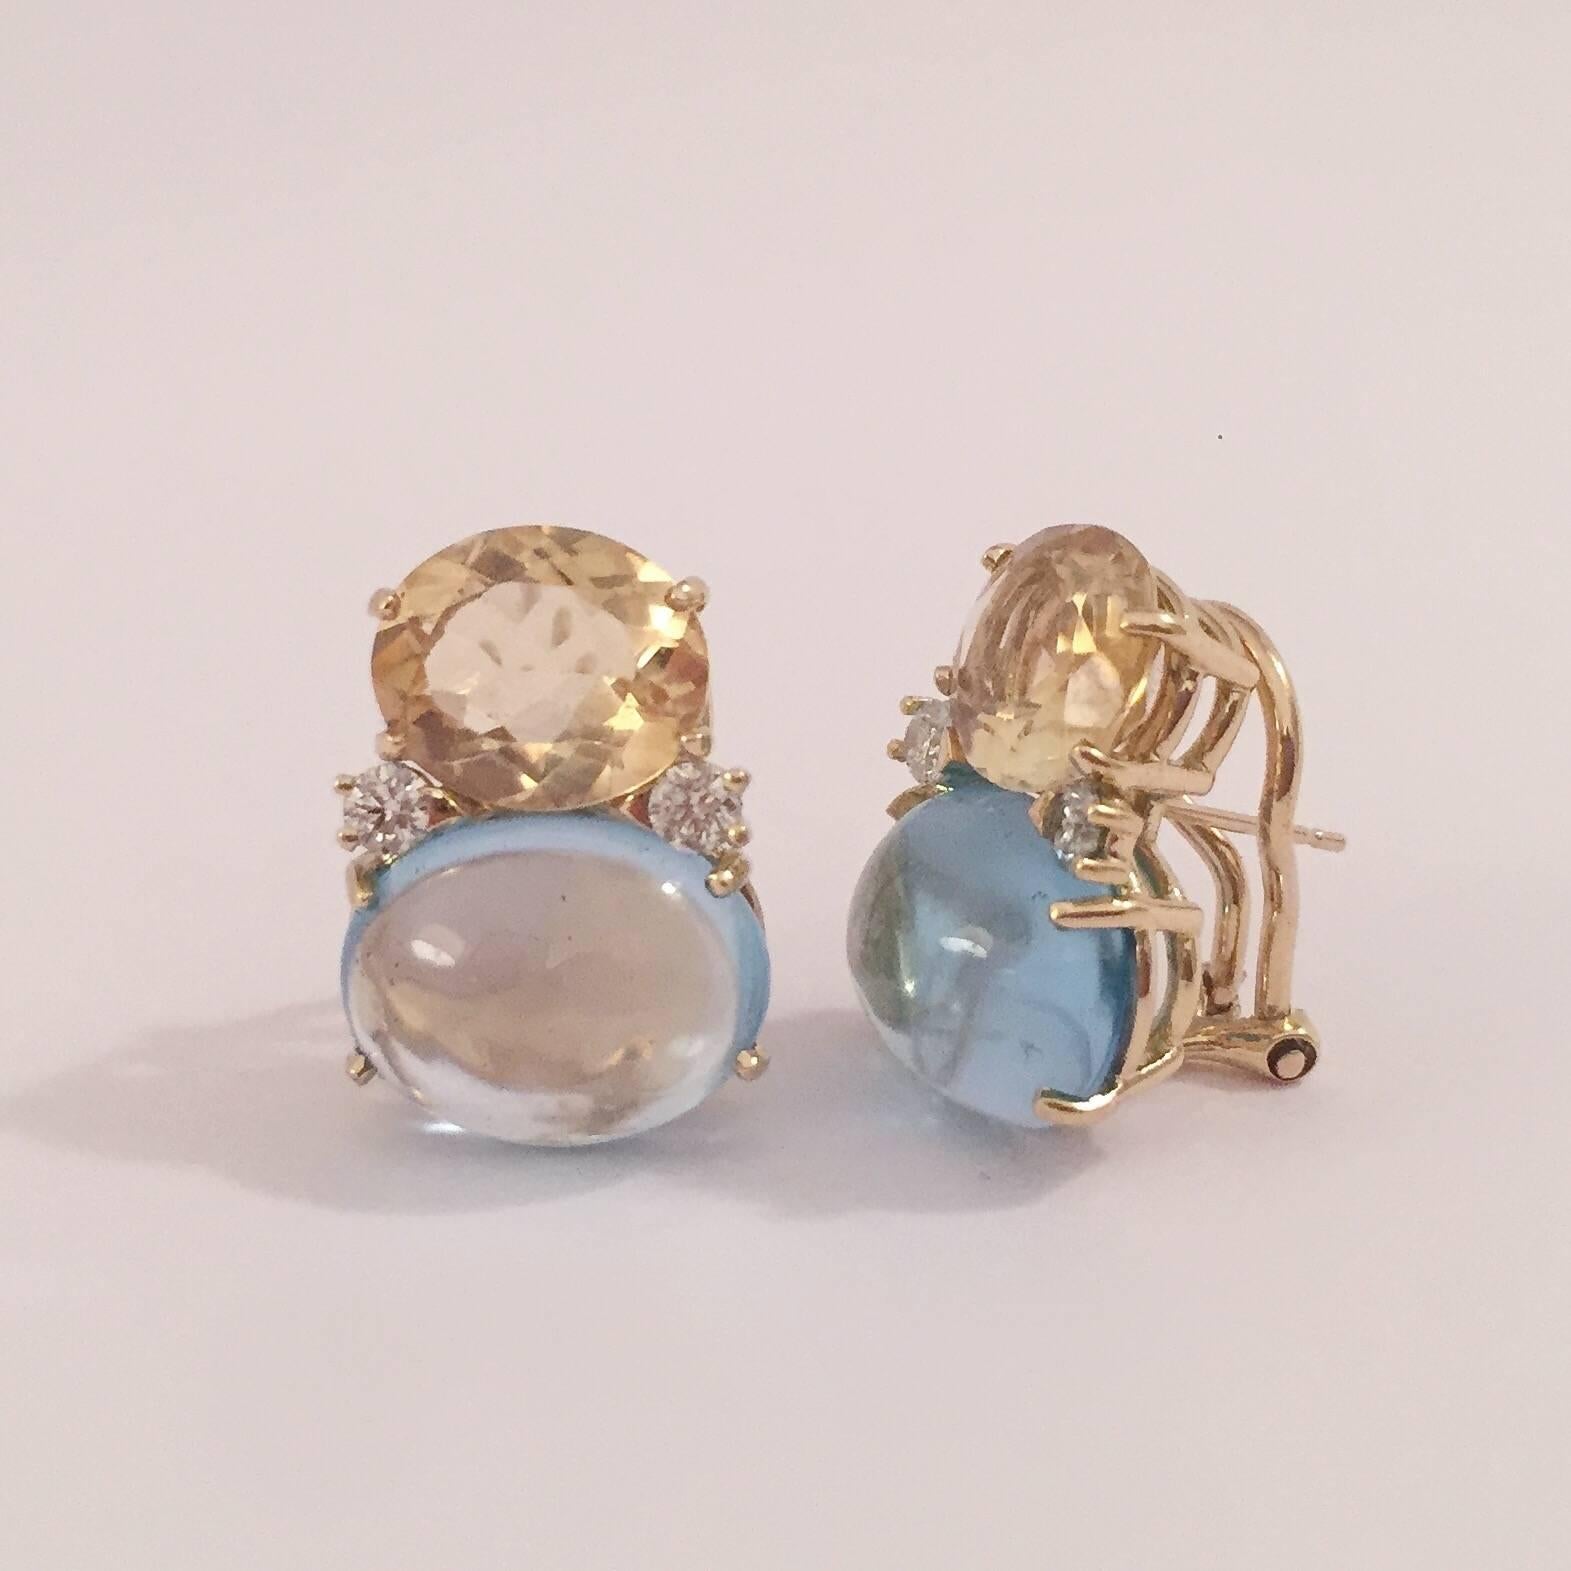 18kt Yellow Gold Large GUM DROP™ Earrings with faceted Citrine and Cabochon Blue Topaz and diamonds. The Top oval faceted Citrine is approximately 5 cts each and the Bottom cabochon Blue Topaz is approximately 12 cts each, and 4 diamonds weighing